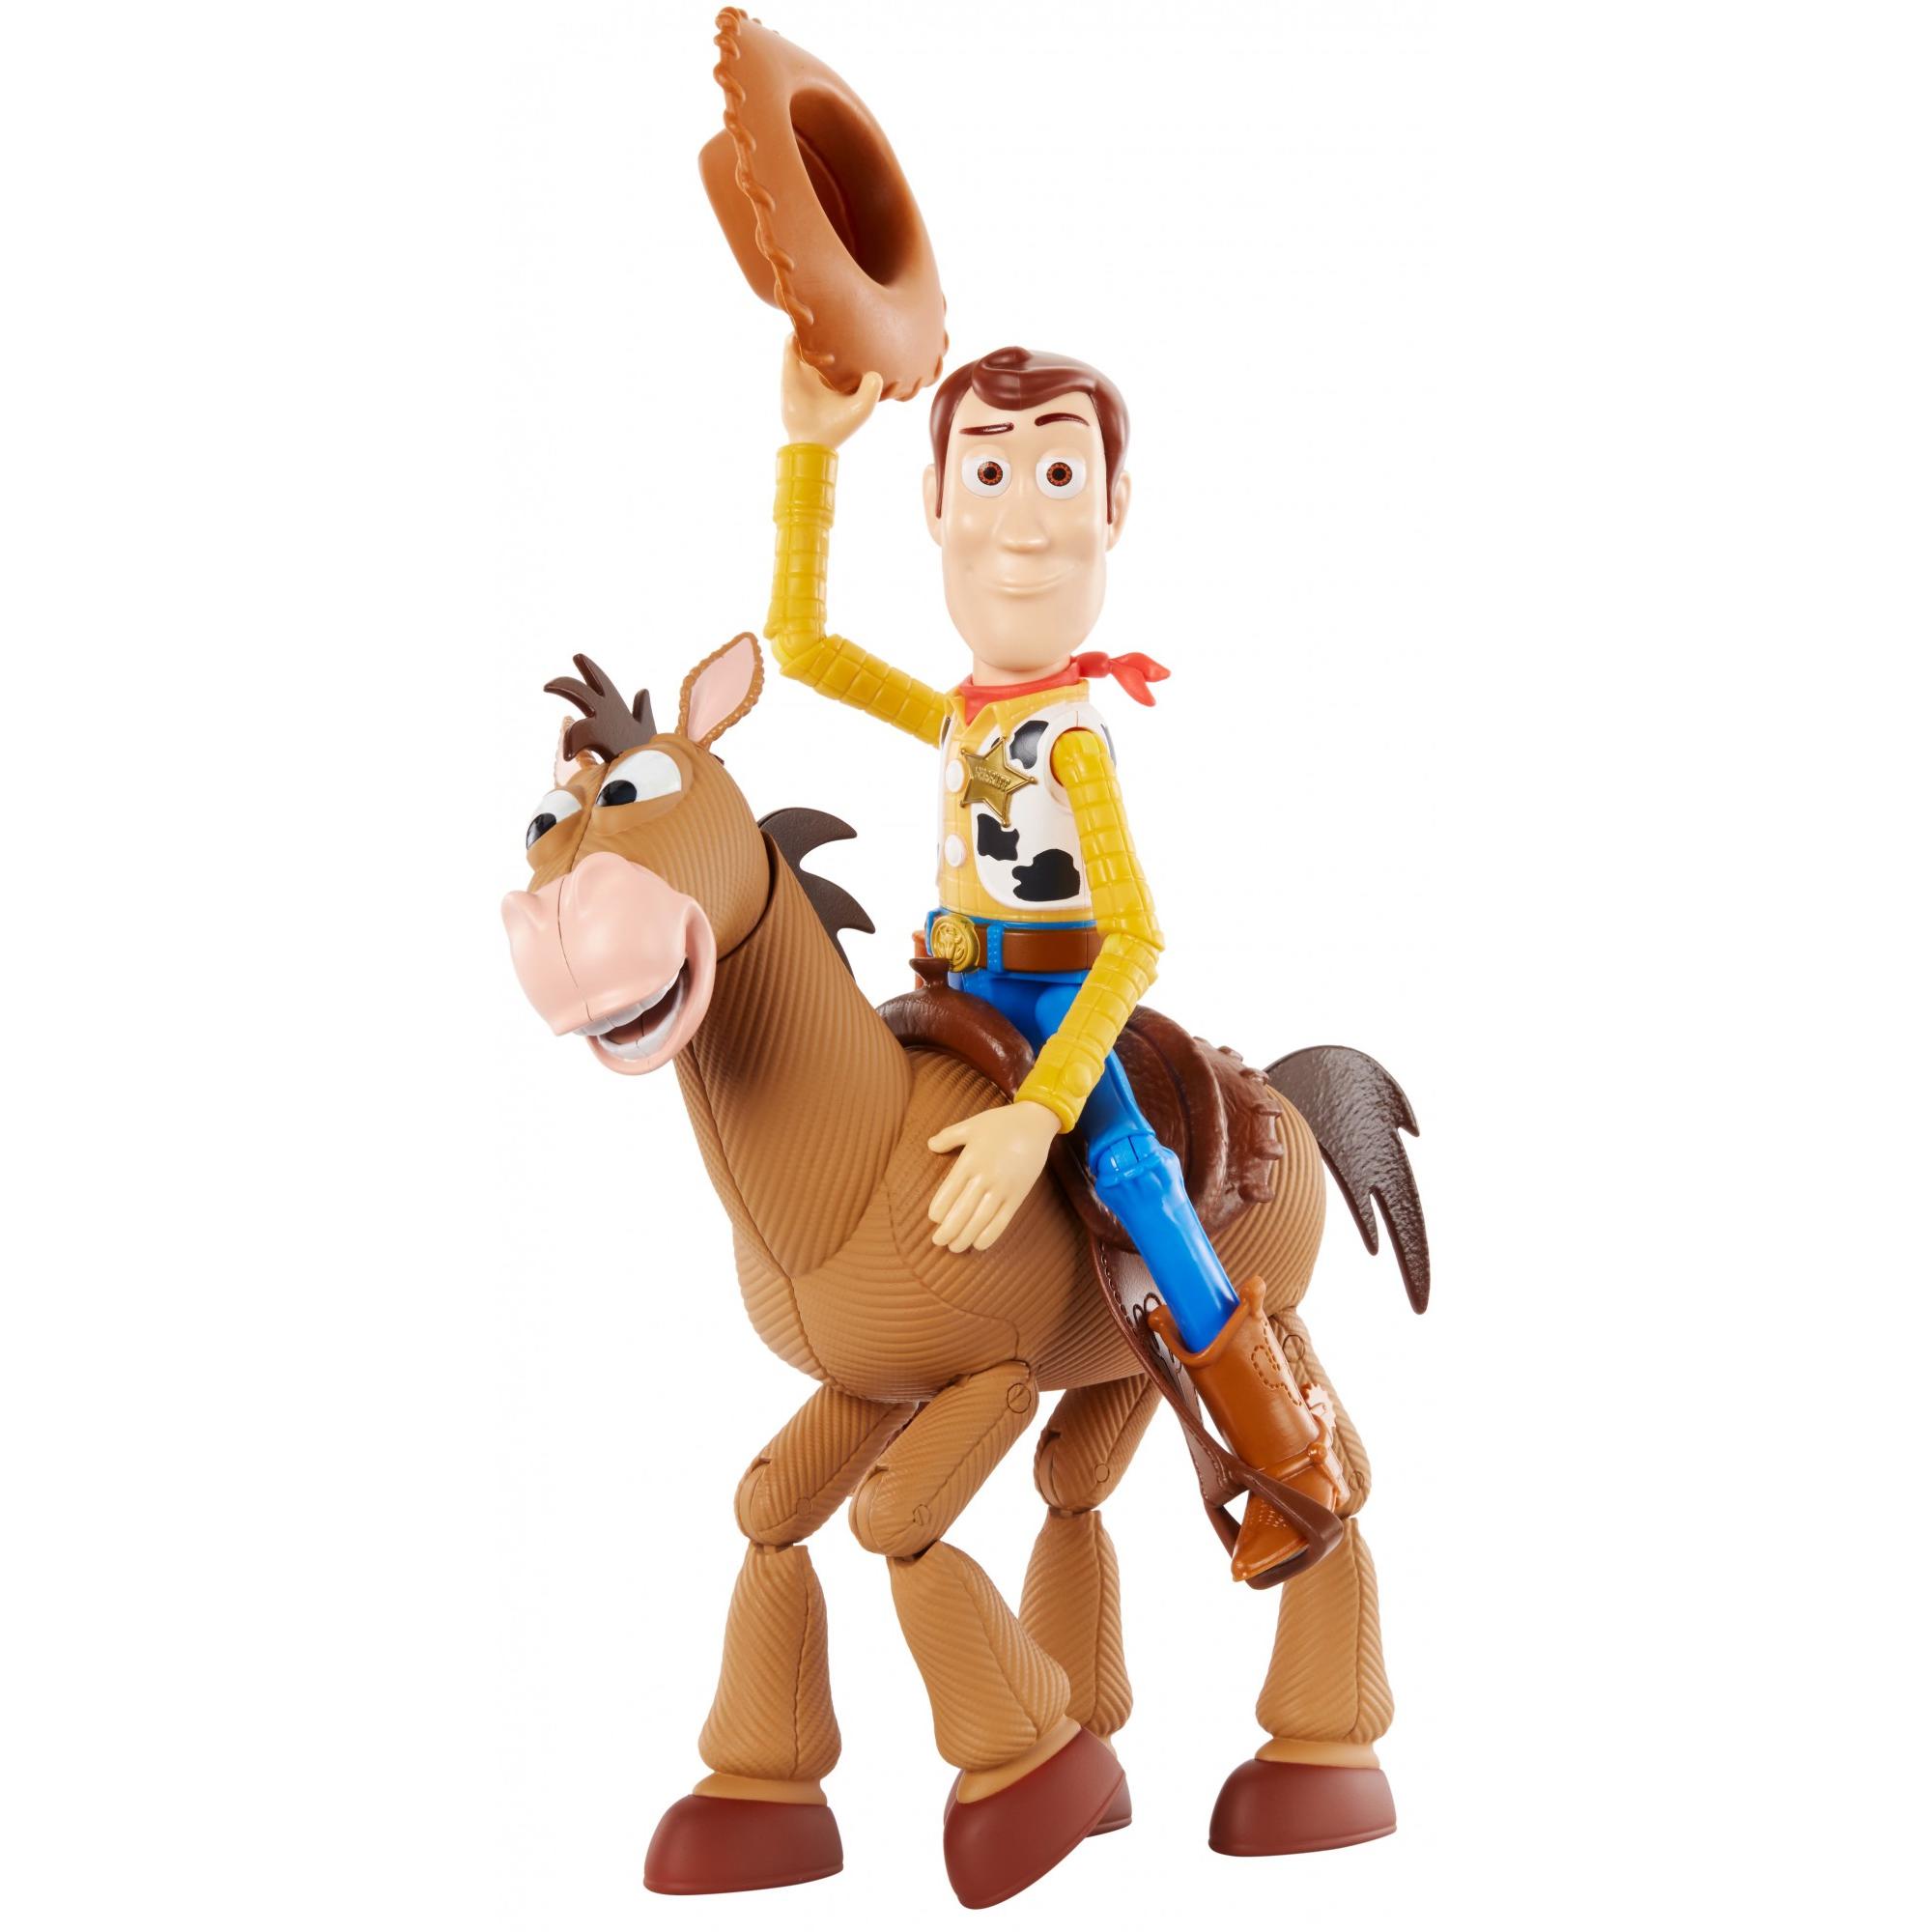 Award Winning Disney/Pixar Toy Story 4 Woody And Buzz Lightyear 2-Character Pack, Movie-Inspired Relative-Scale For Storytelling Play - image 4 of 8